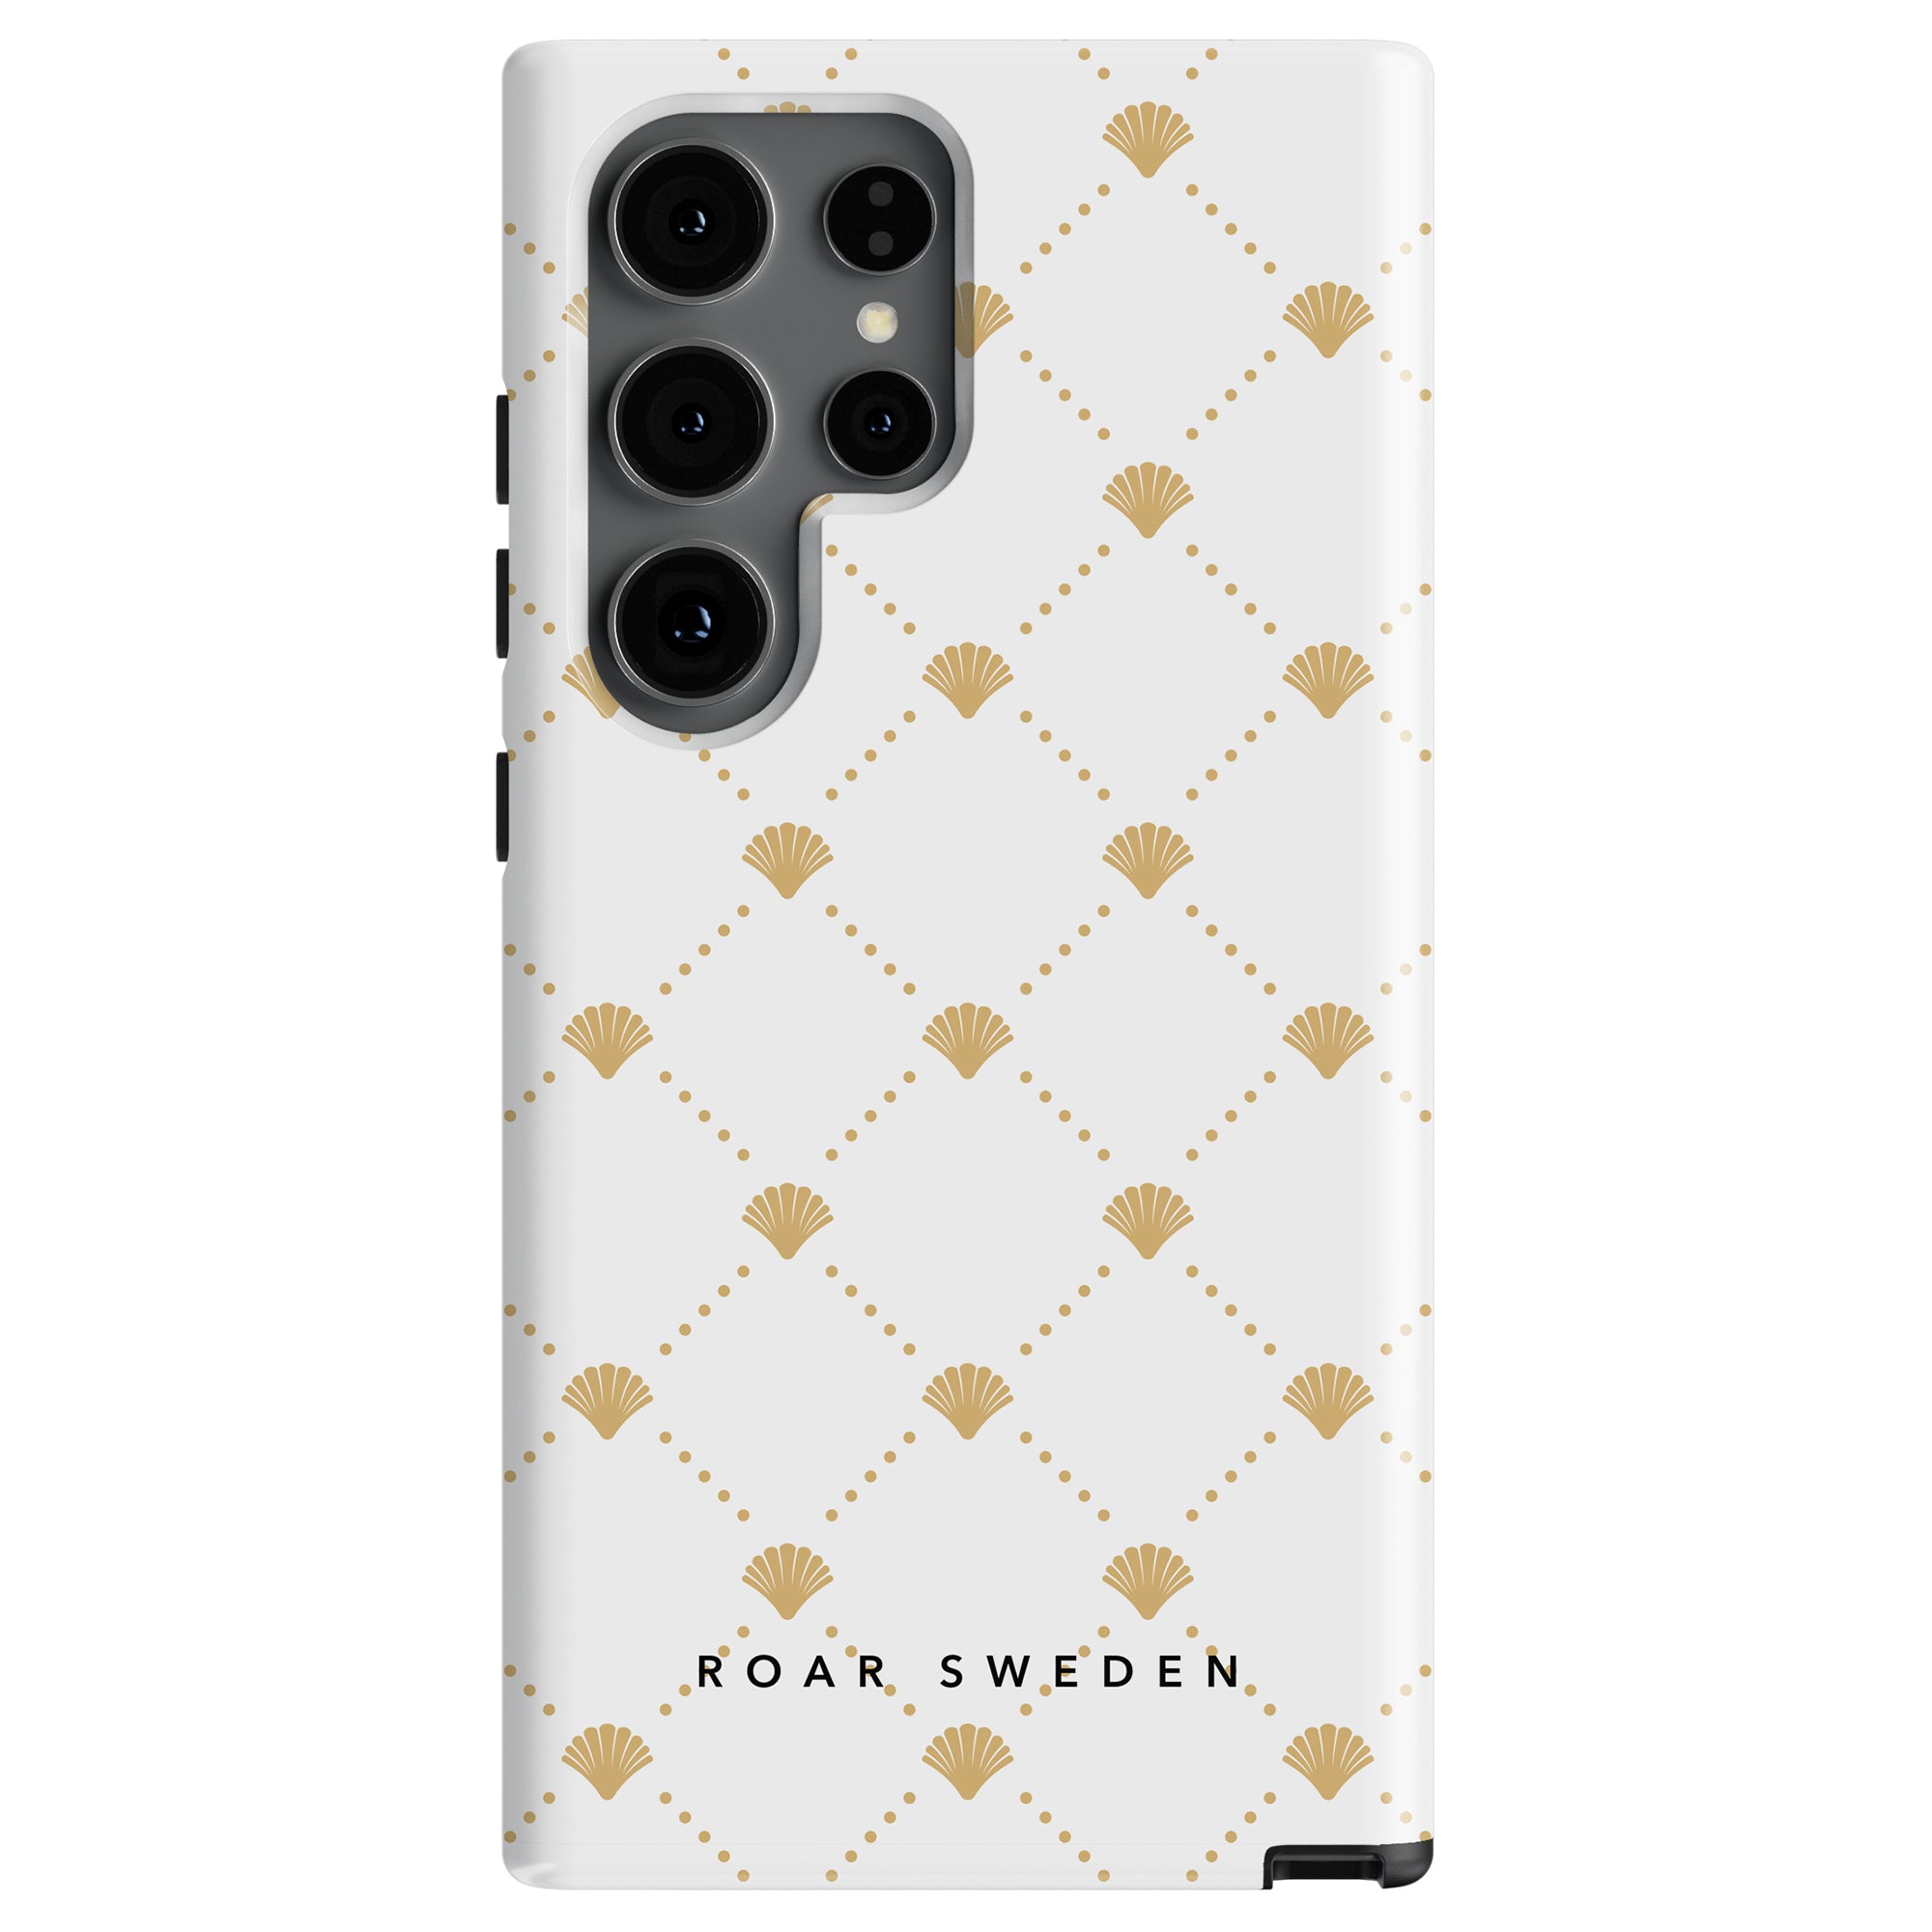 White smartphone case with gold geometric and shell pattern, featuring three large and two small camera lens cutouts. Part of the Ocean Collection, this Luxe Shells White - Tough Case offers both elegance and durability. Text at the bottom reads "ROAR SWEDEN".